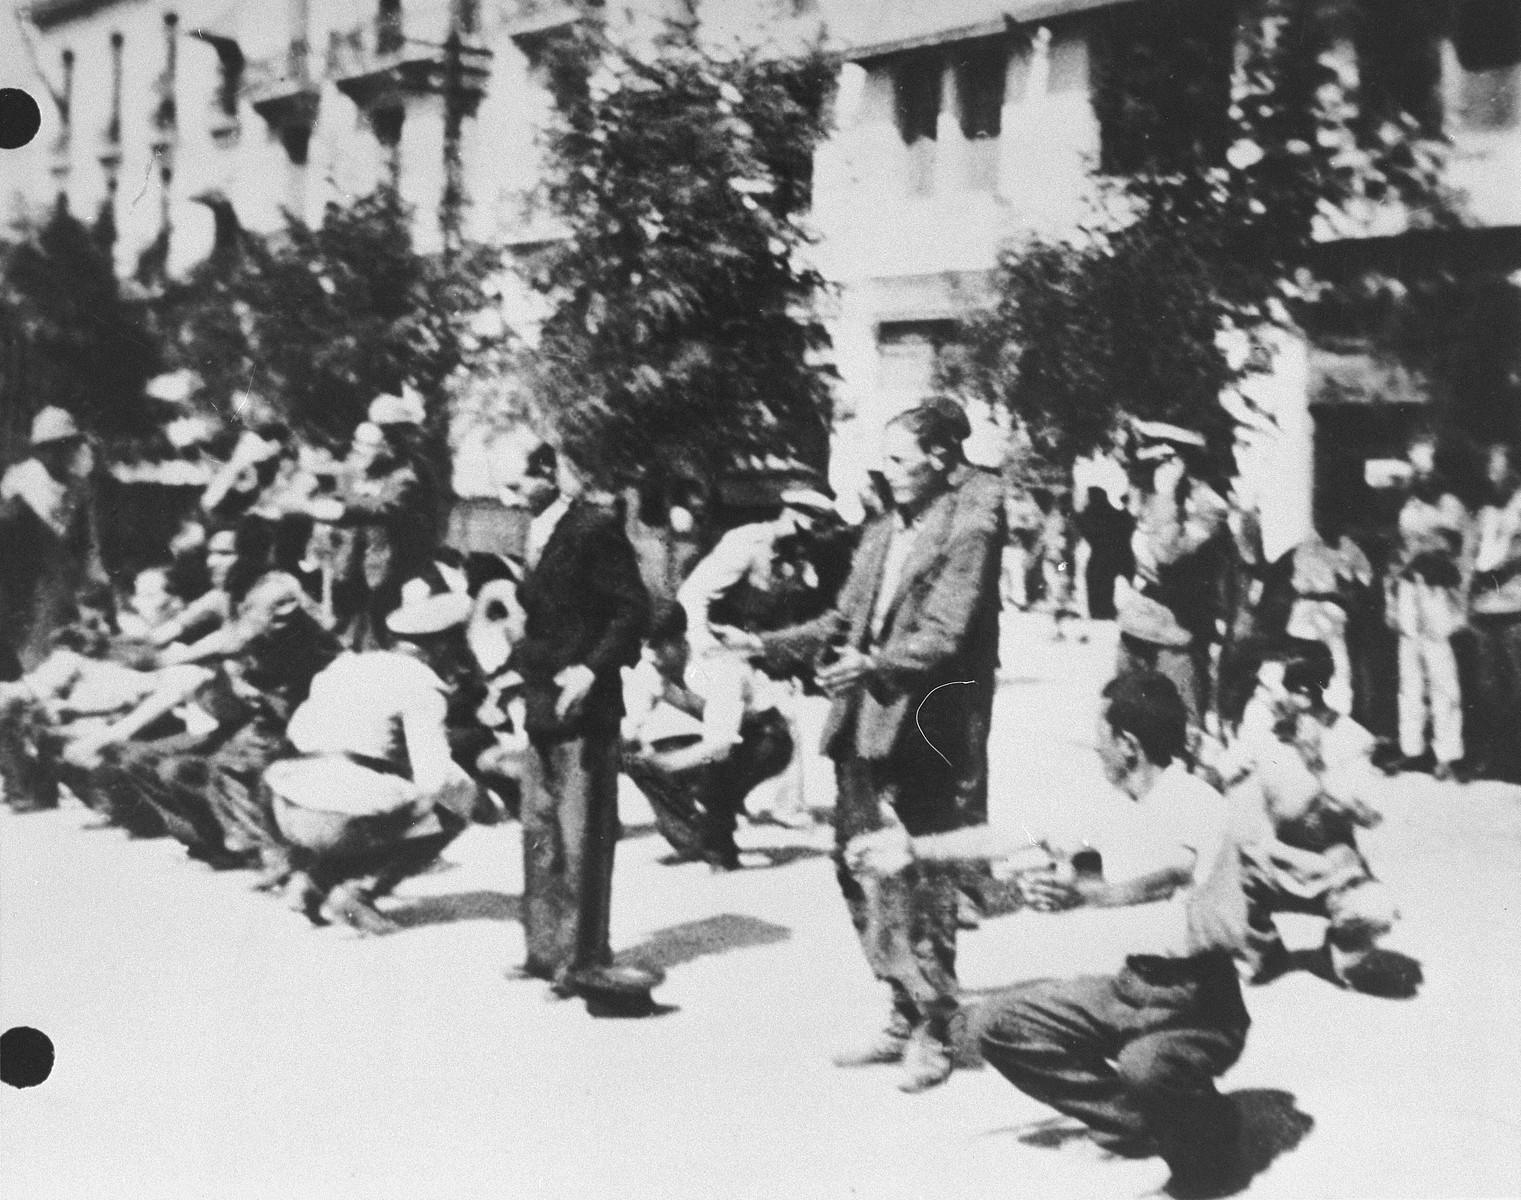 German soldiers force Jews assembled on Eleftheria (Freedom) Square to perform calisthenics.